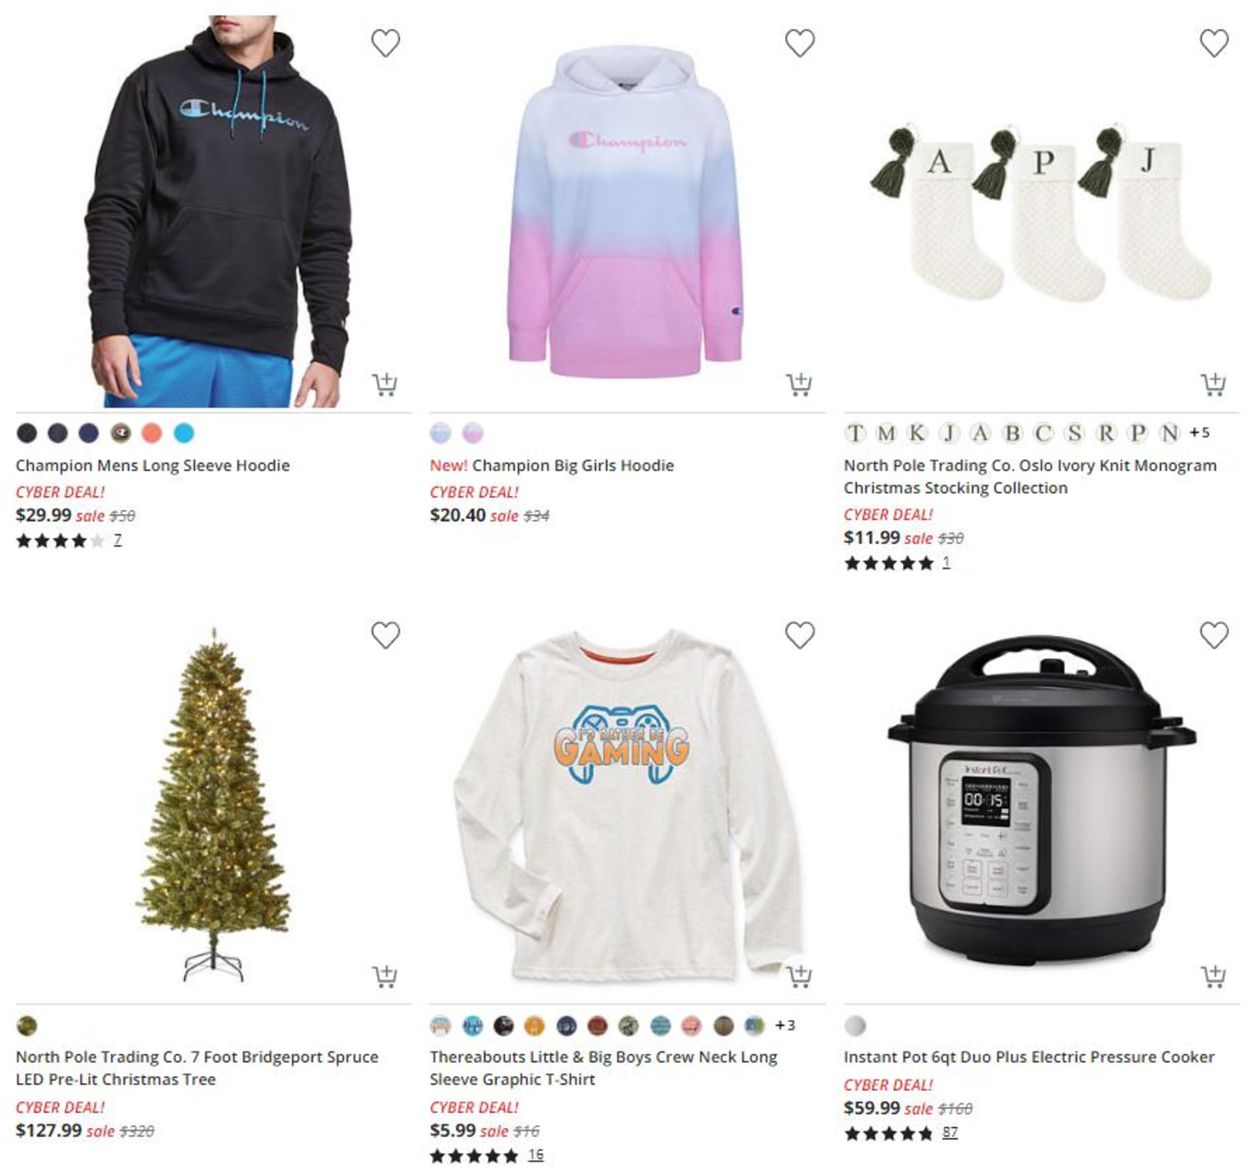 Catalogue JCPenney CYBER DAYS 2021 from 11/29/2021